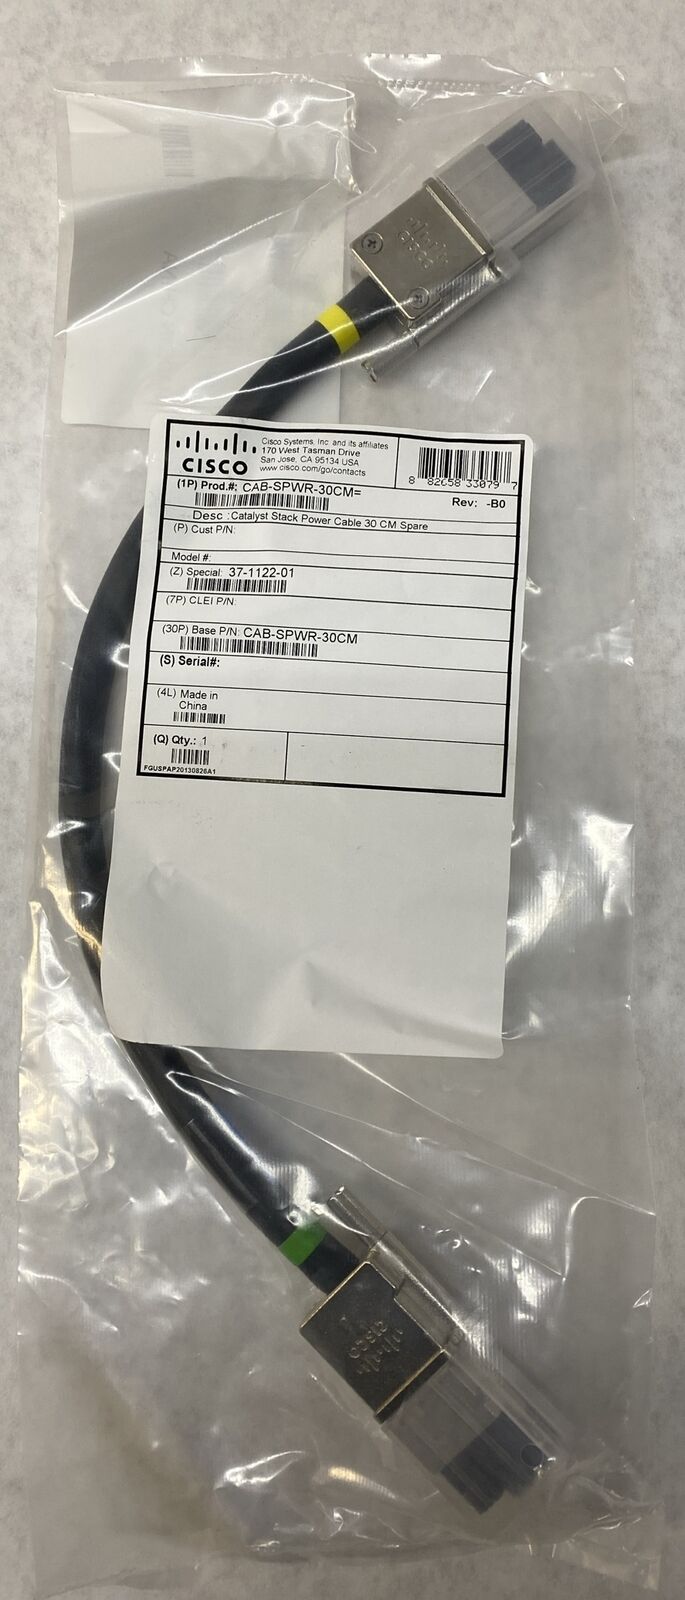 Cisco CAB-SPWR-30CM 37-1122-01 3850 Stack Power Cable NEW SEALED